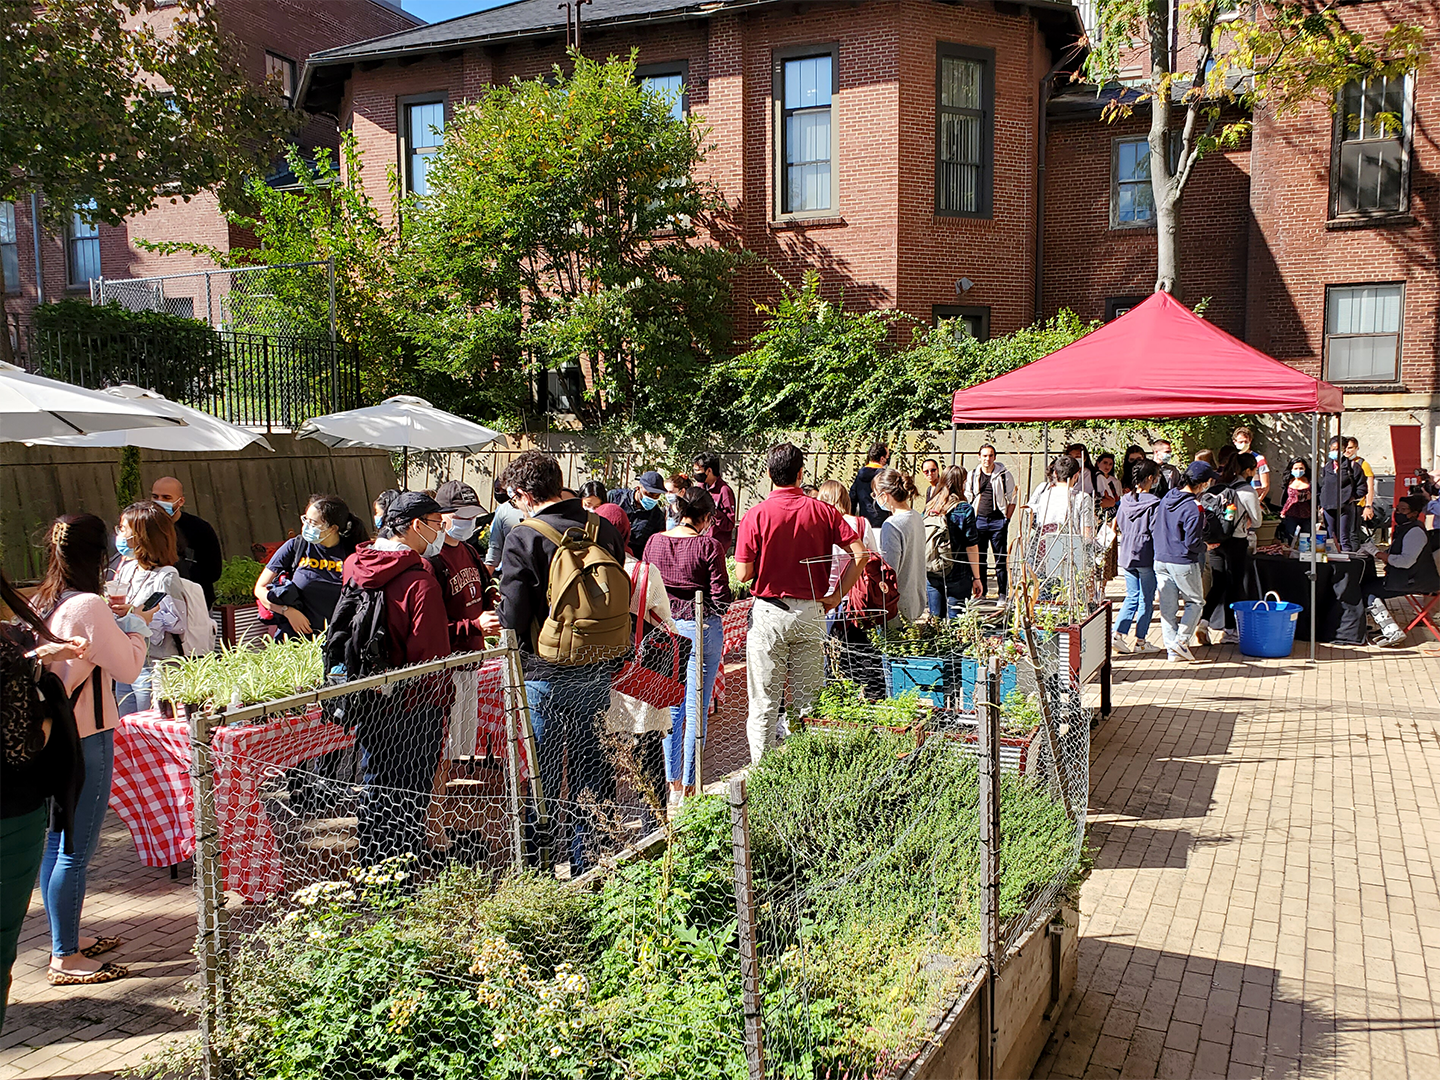 grad students gathered in the community garden